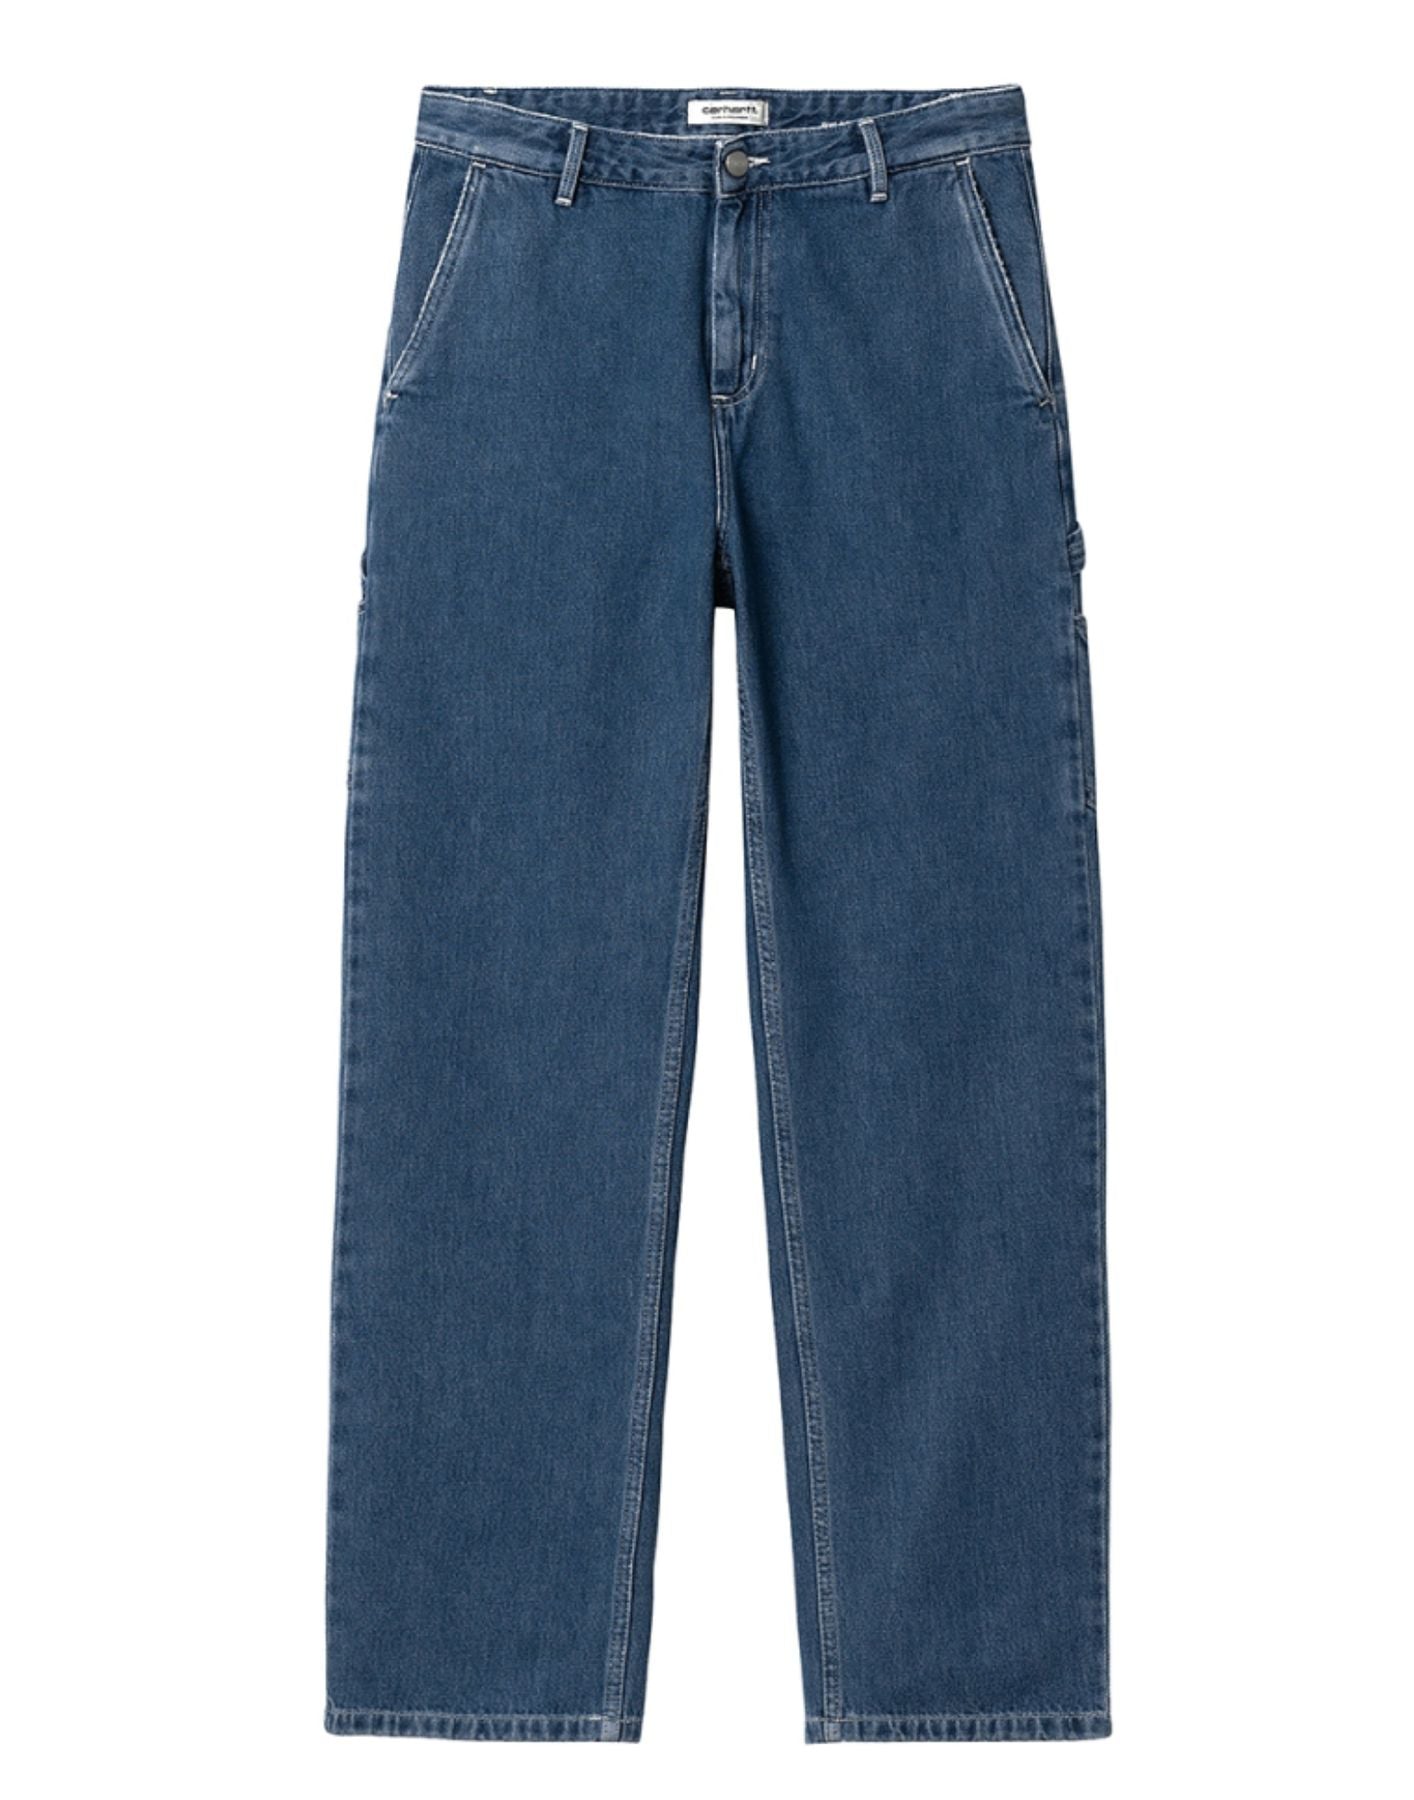 Jeans para la mujer I031251 BLUE STONE WASHED CARHARTT WIP